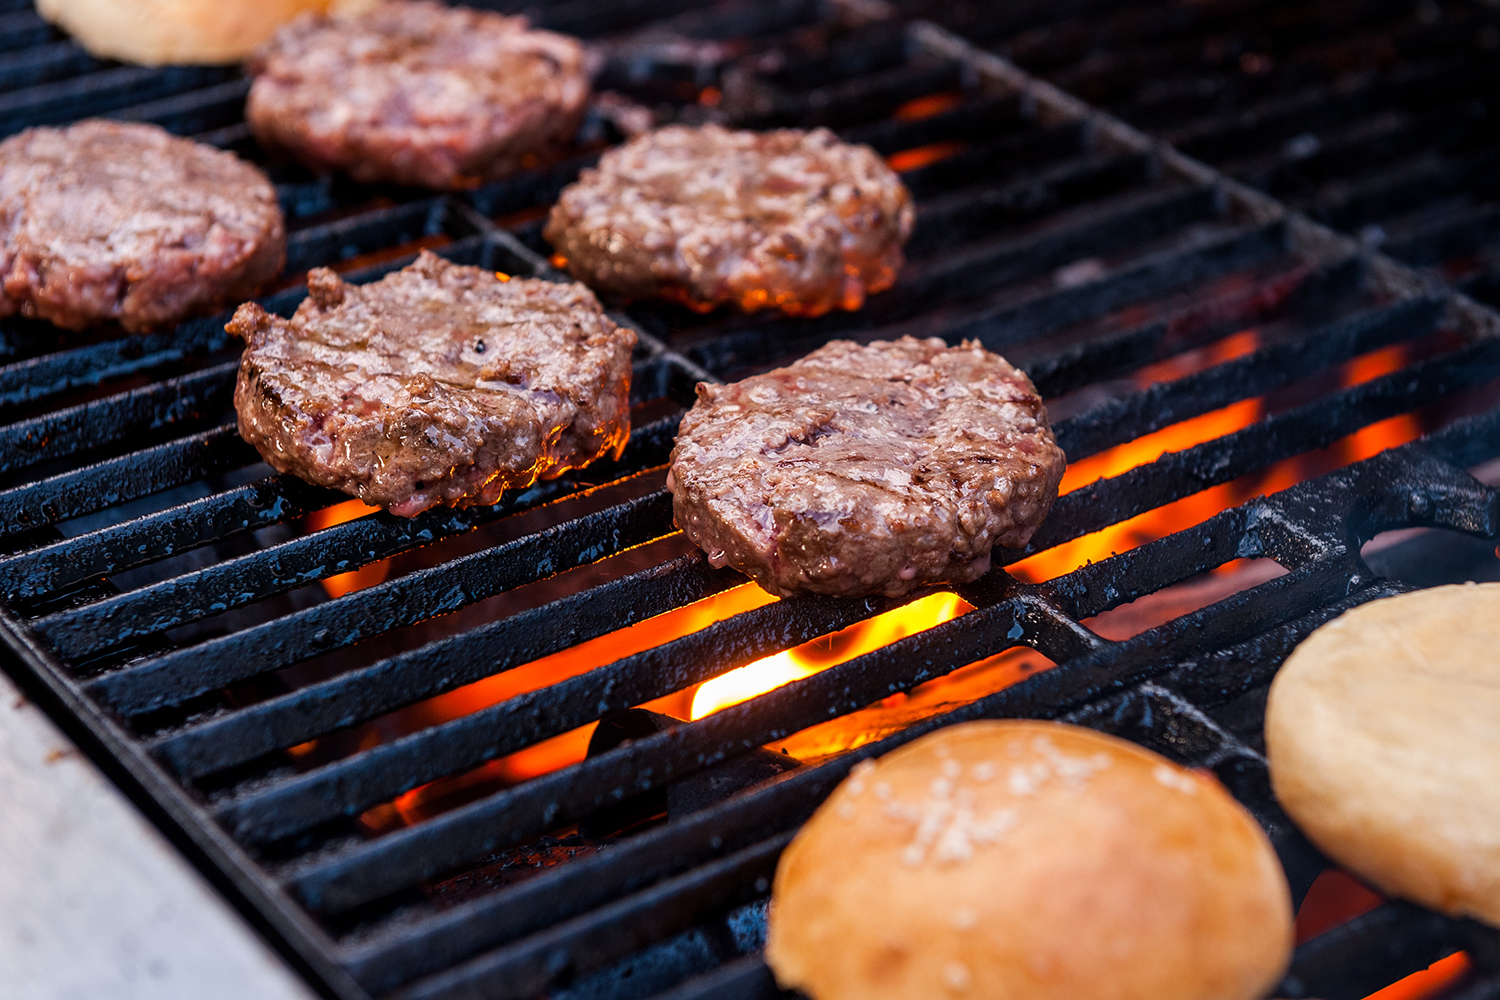 How to Grill Burgers The Right Way Every Time - The Manual